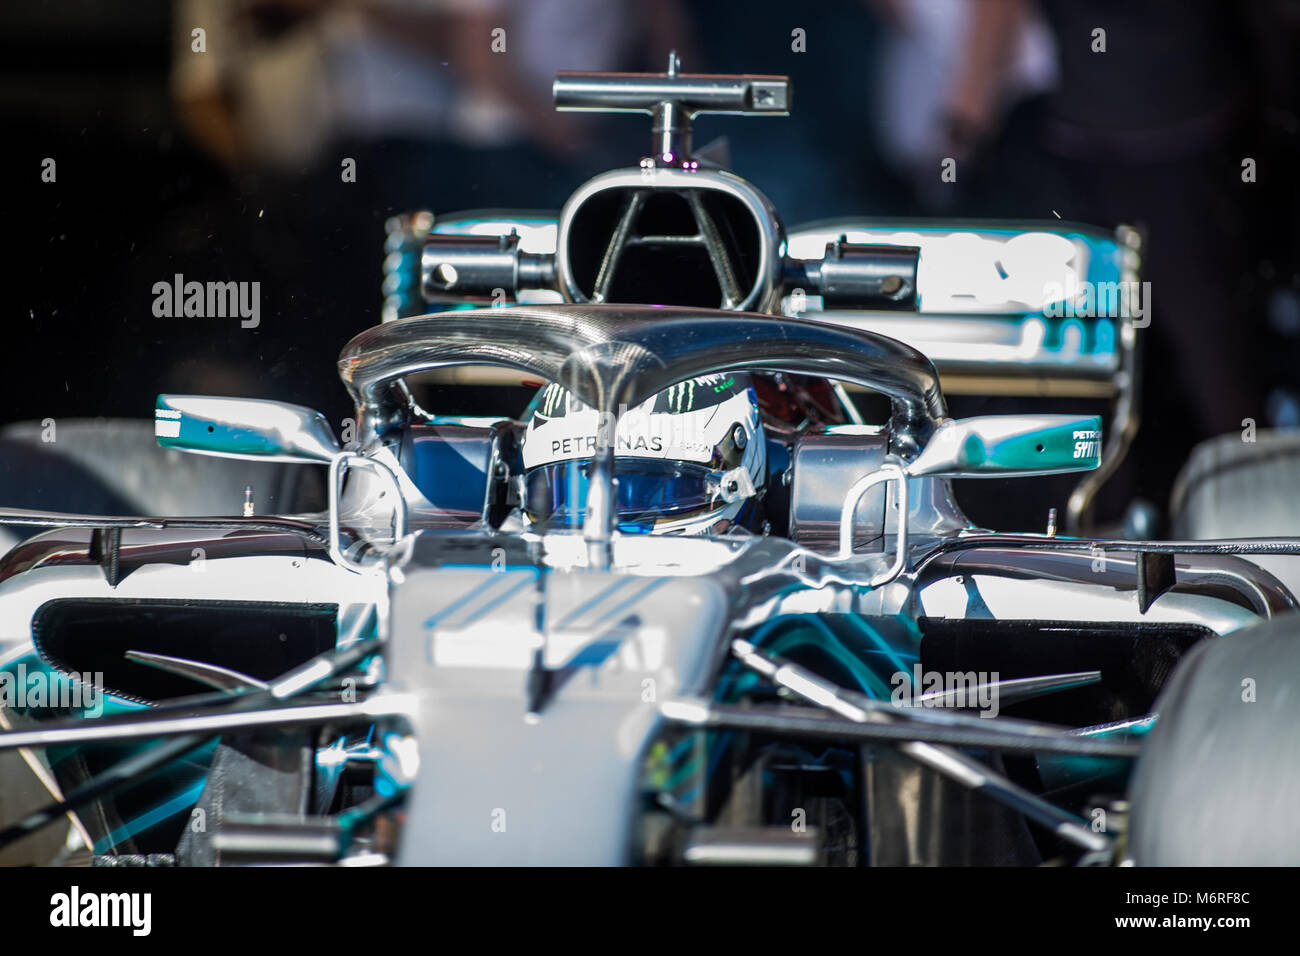 Montmelo, Catalonia, Spain. 6th Mar, 2018. Bottas, Mercedes F1 Team's driver seen during day 1 of the second week of the F1 test days at Barcelona-Catalunya Circuit. Credit:  MA 4845.jpg/SOPA Images/ZUMA Wire/Alamy Live News Stock Photo